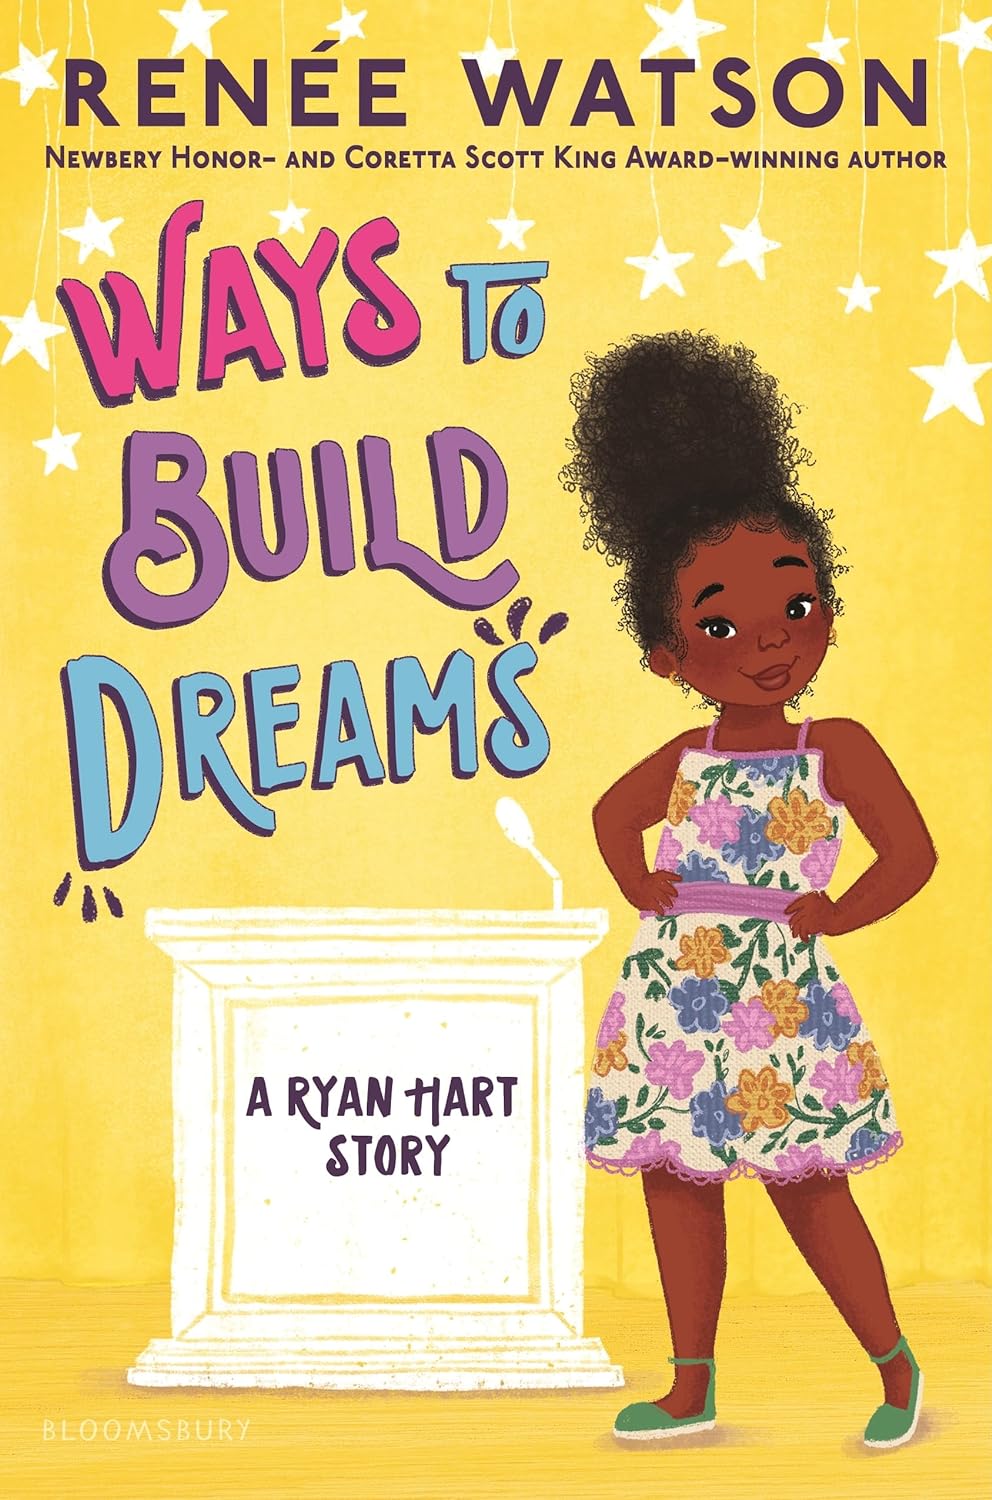 Image for "Ways to Build Dreams"